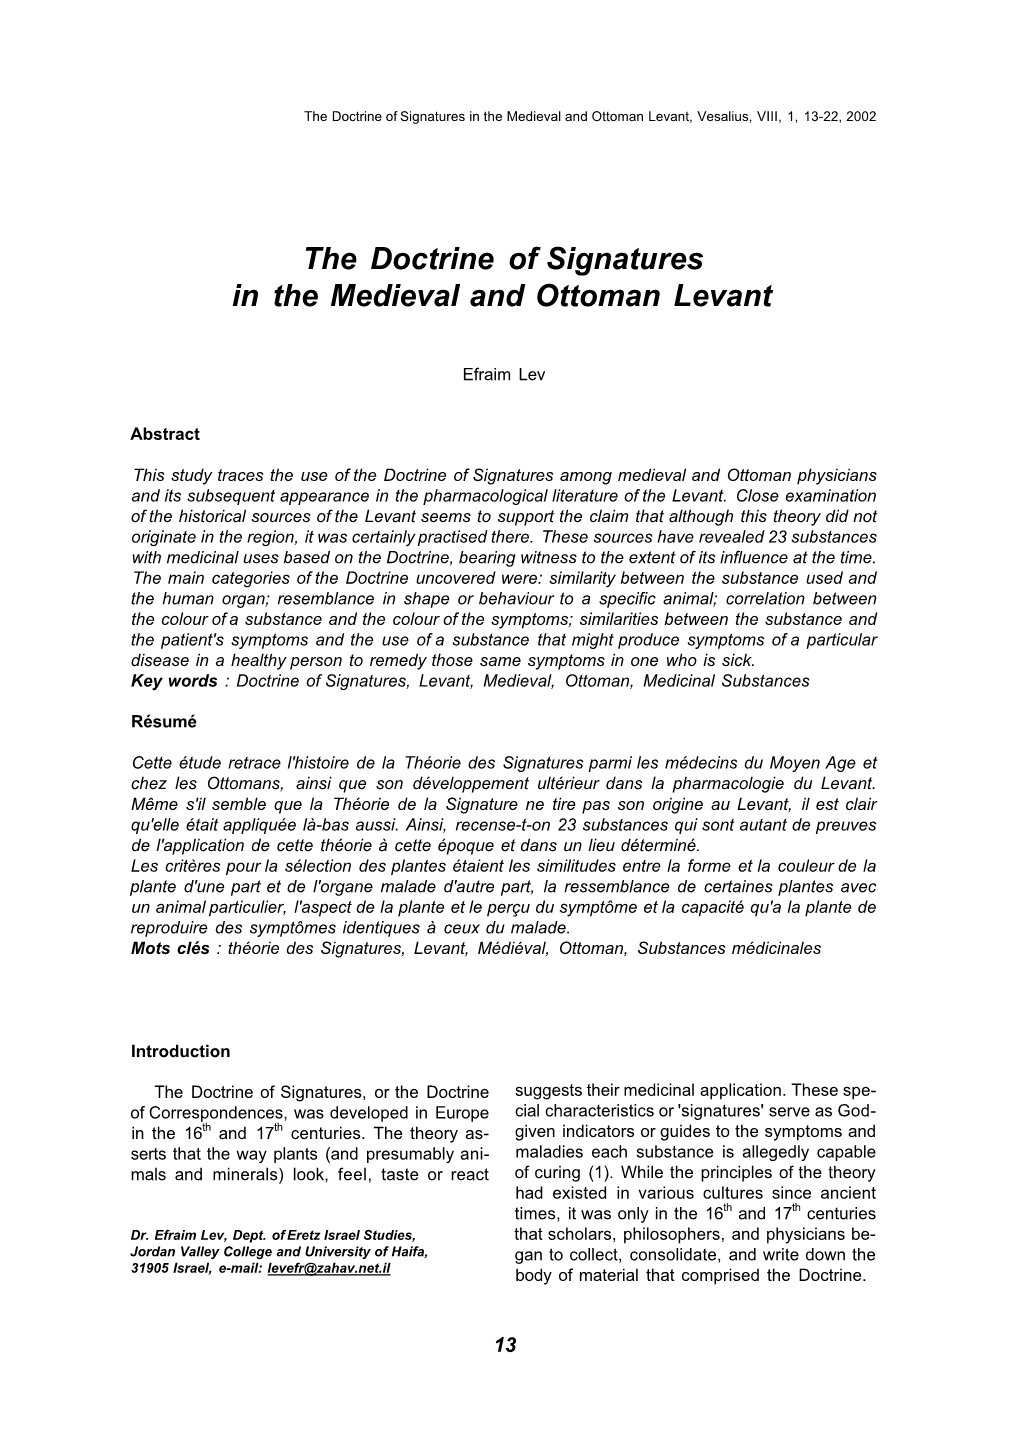 The Doctrine of Signatures in the Medieval and Ottoman Levant, Vesalius, VIII, 1, 13-22, 2002